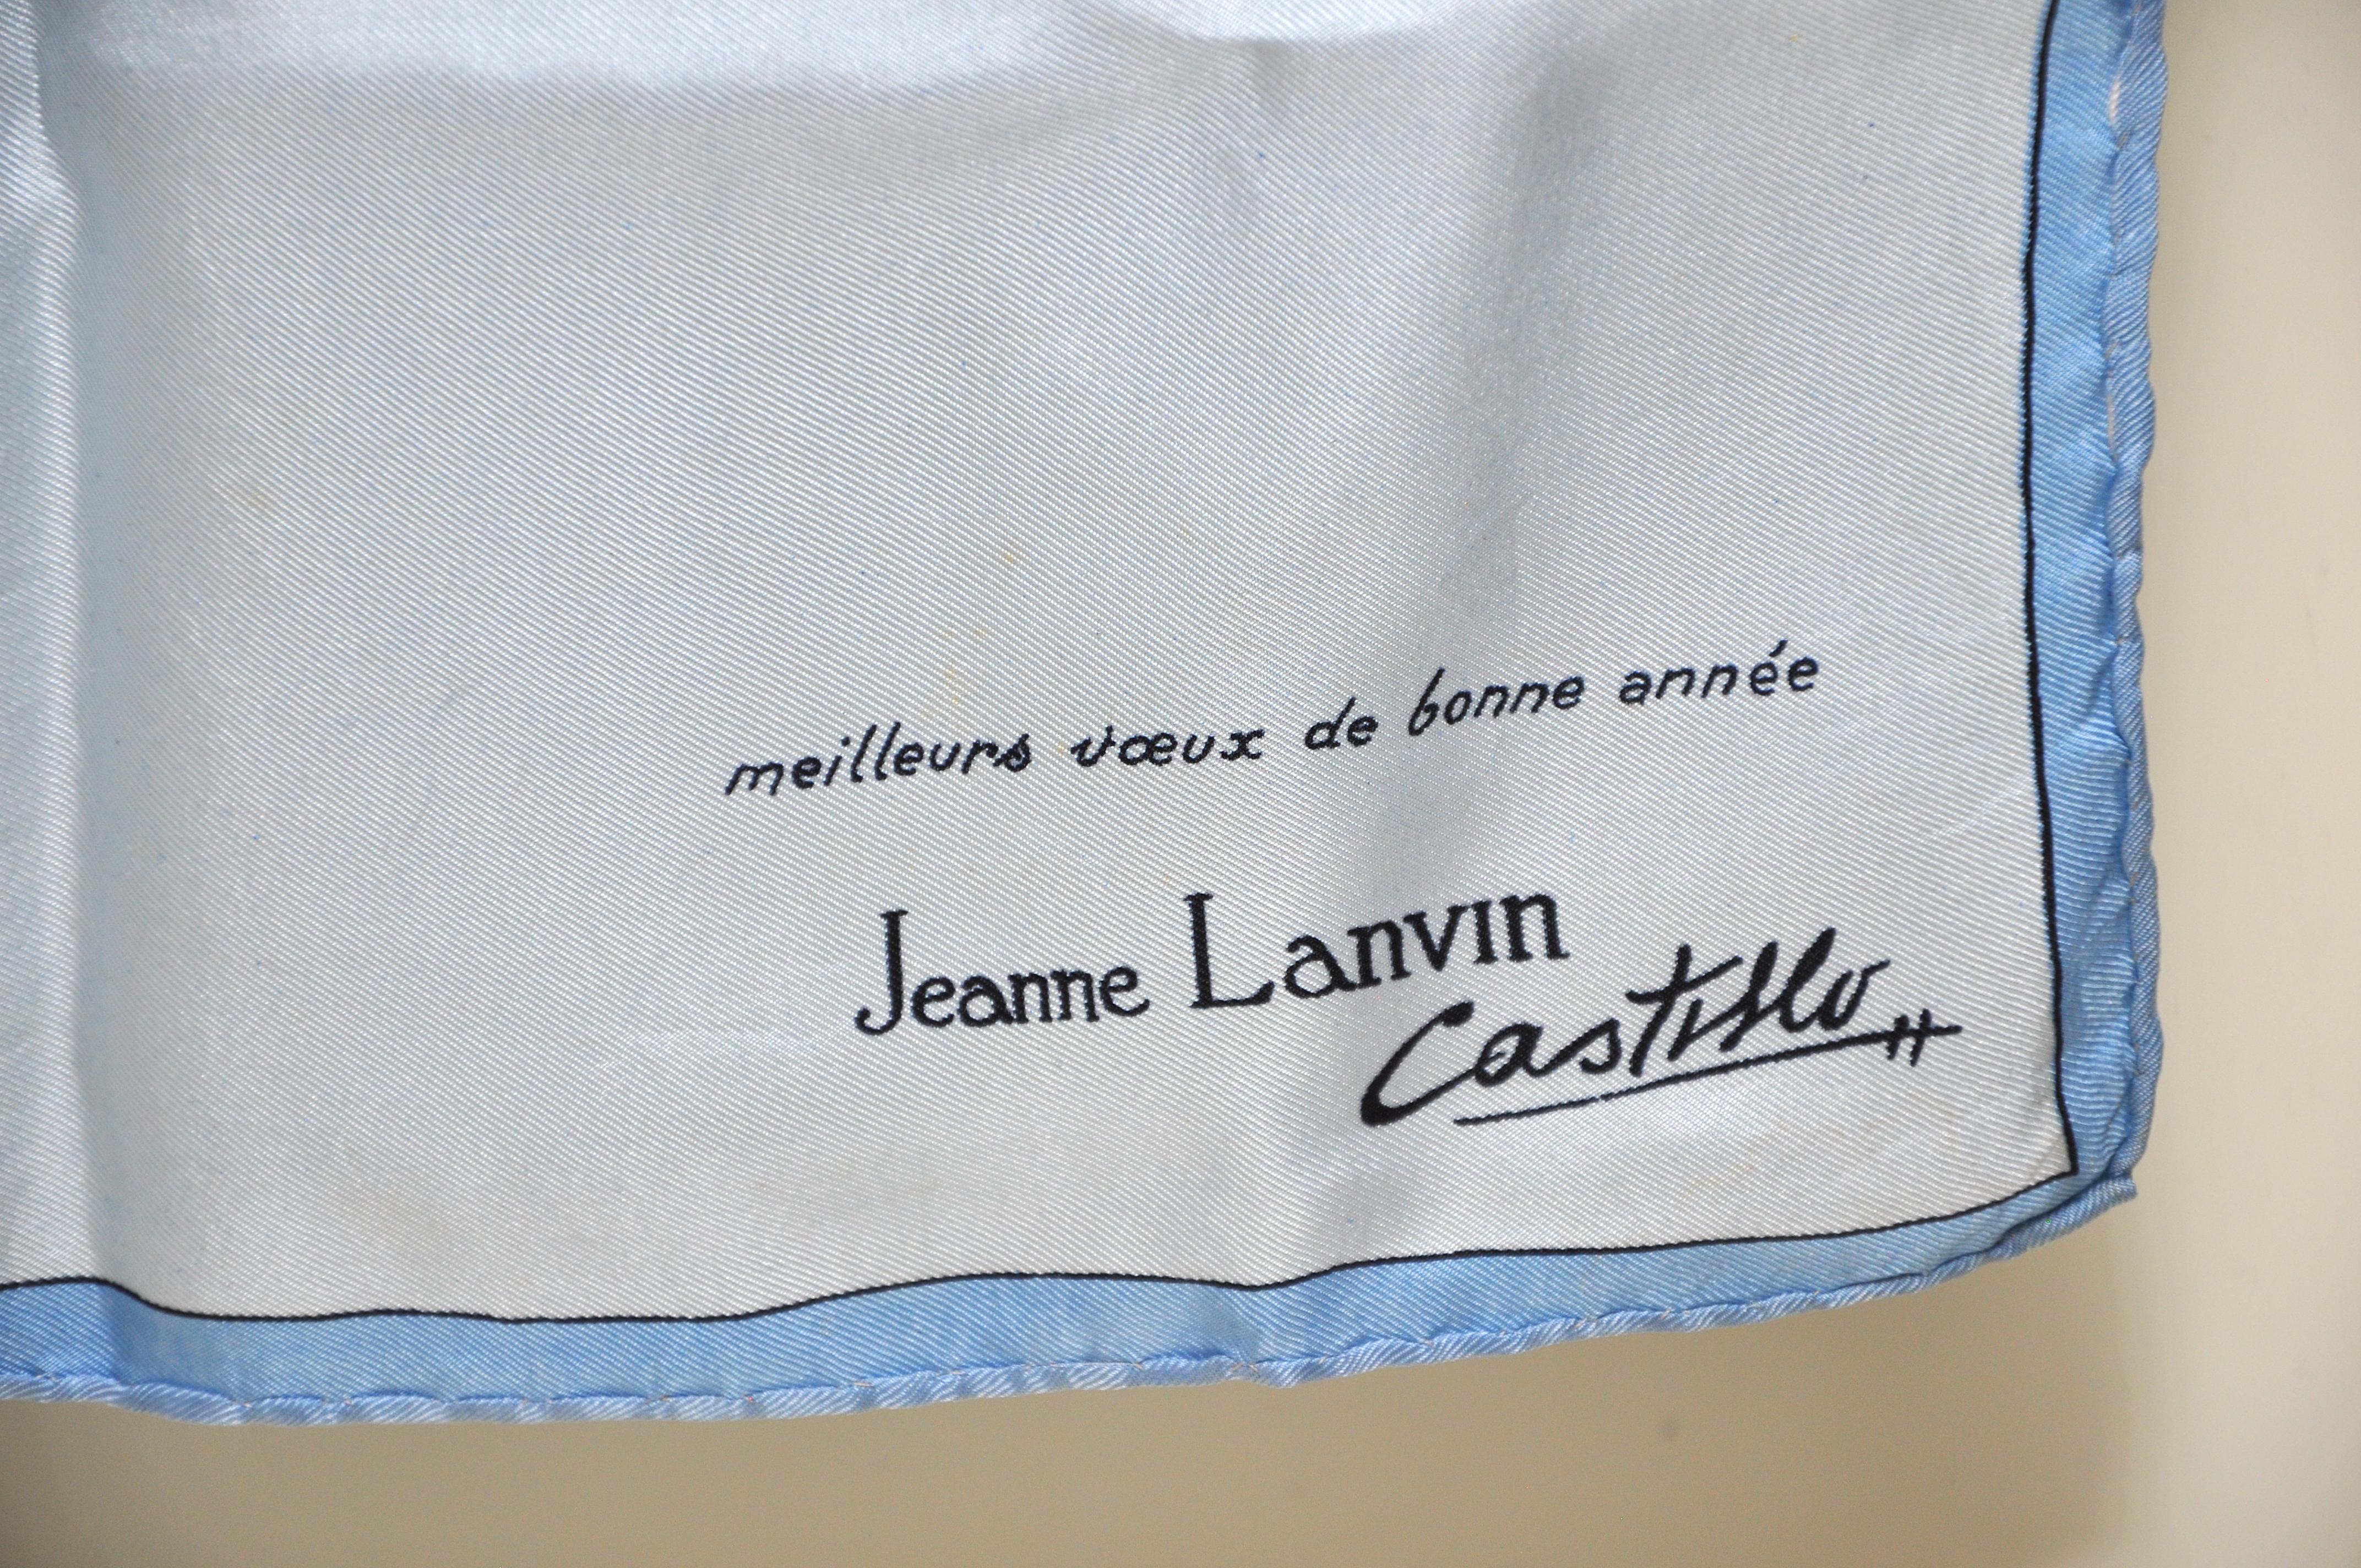 Large vintage Lanvin silk scarf pale blue butterflies fruits French

Beautiful and rare vintage silk scarf 

Very pretty with butterfly and dragonflies 

‘Jeanne Lanvin’ logo/signature 

Such a joyous piece art of, it reads ’meilleurs voeux de bonne